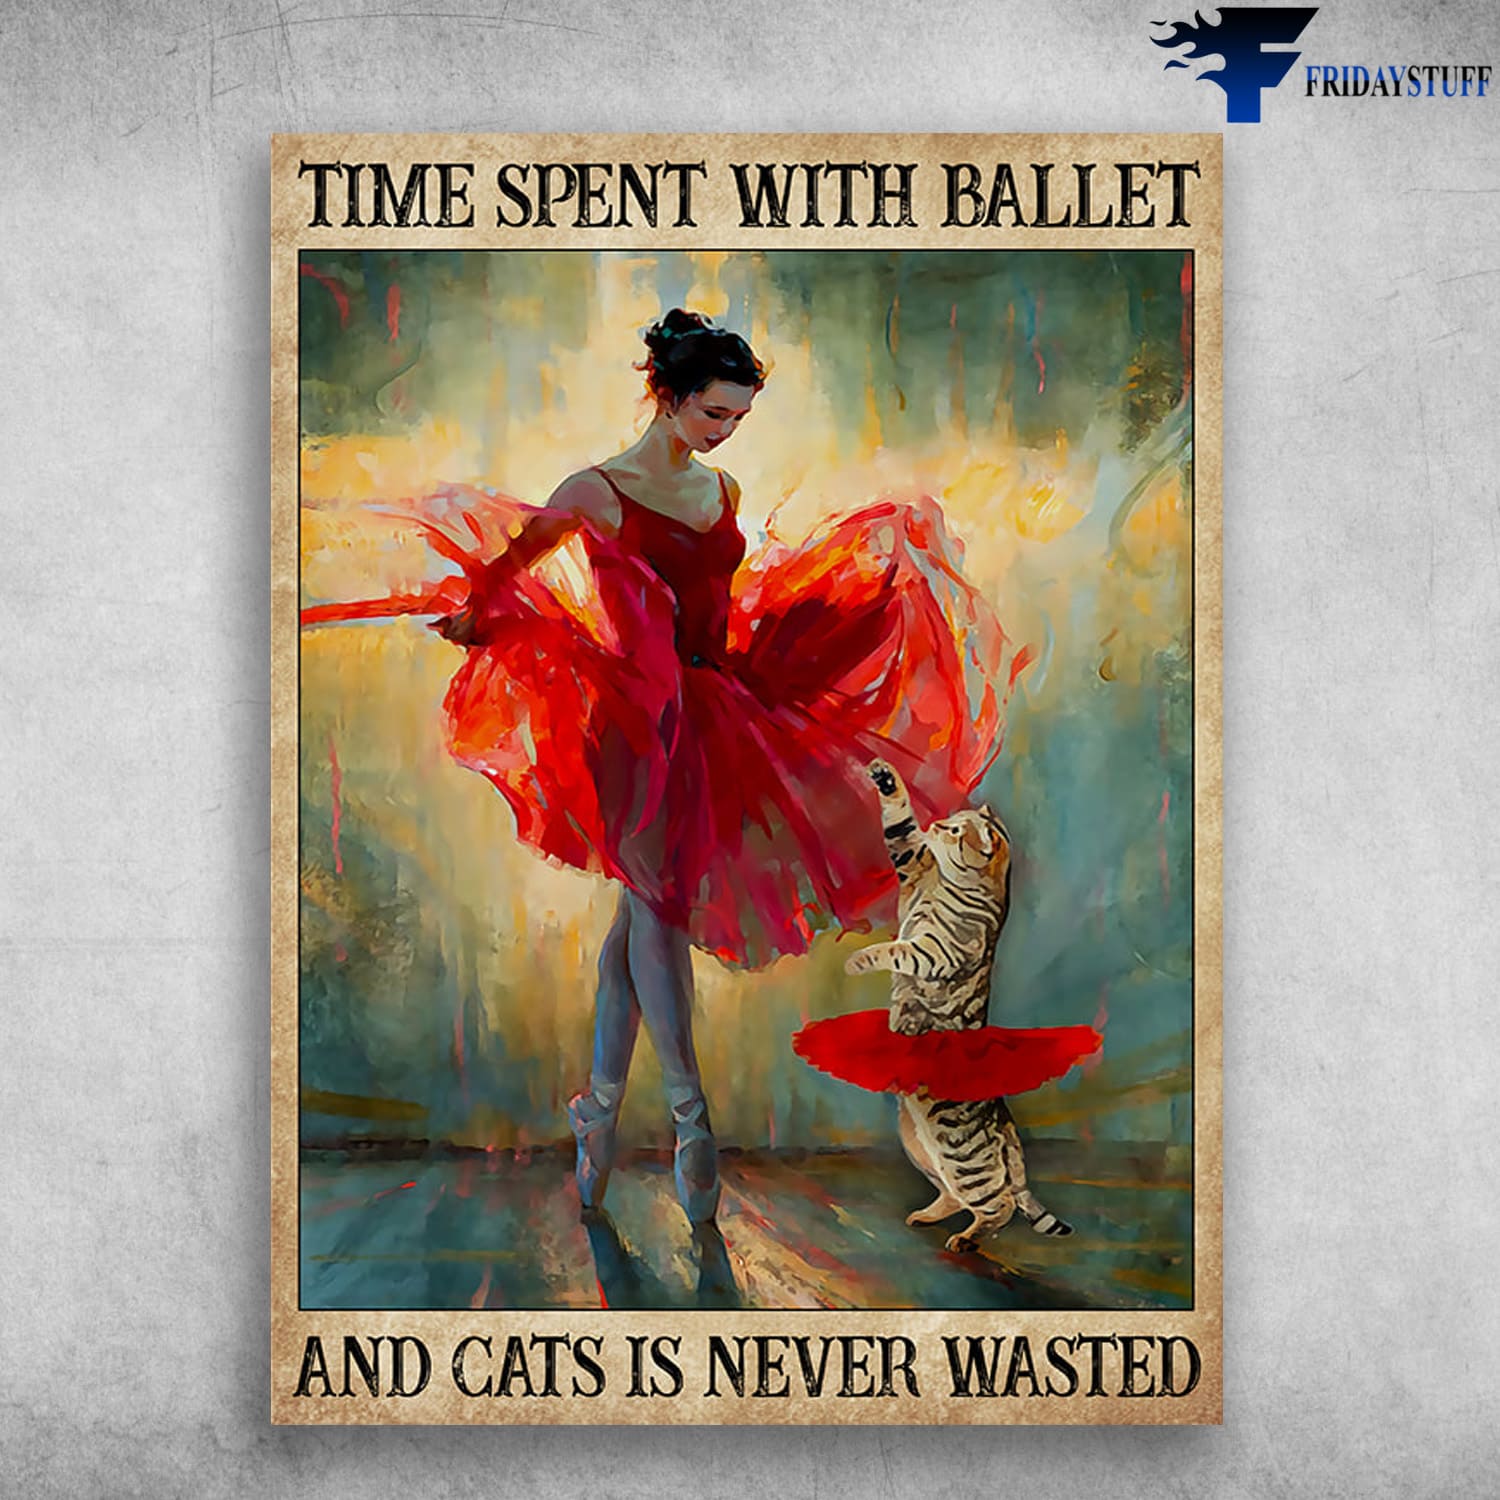 Ballet Girl, Dancing With Cat, Time Spent With Ballet, And Cats Is Never Wasted